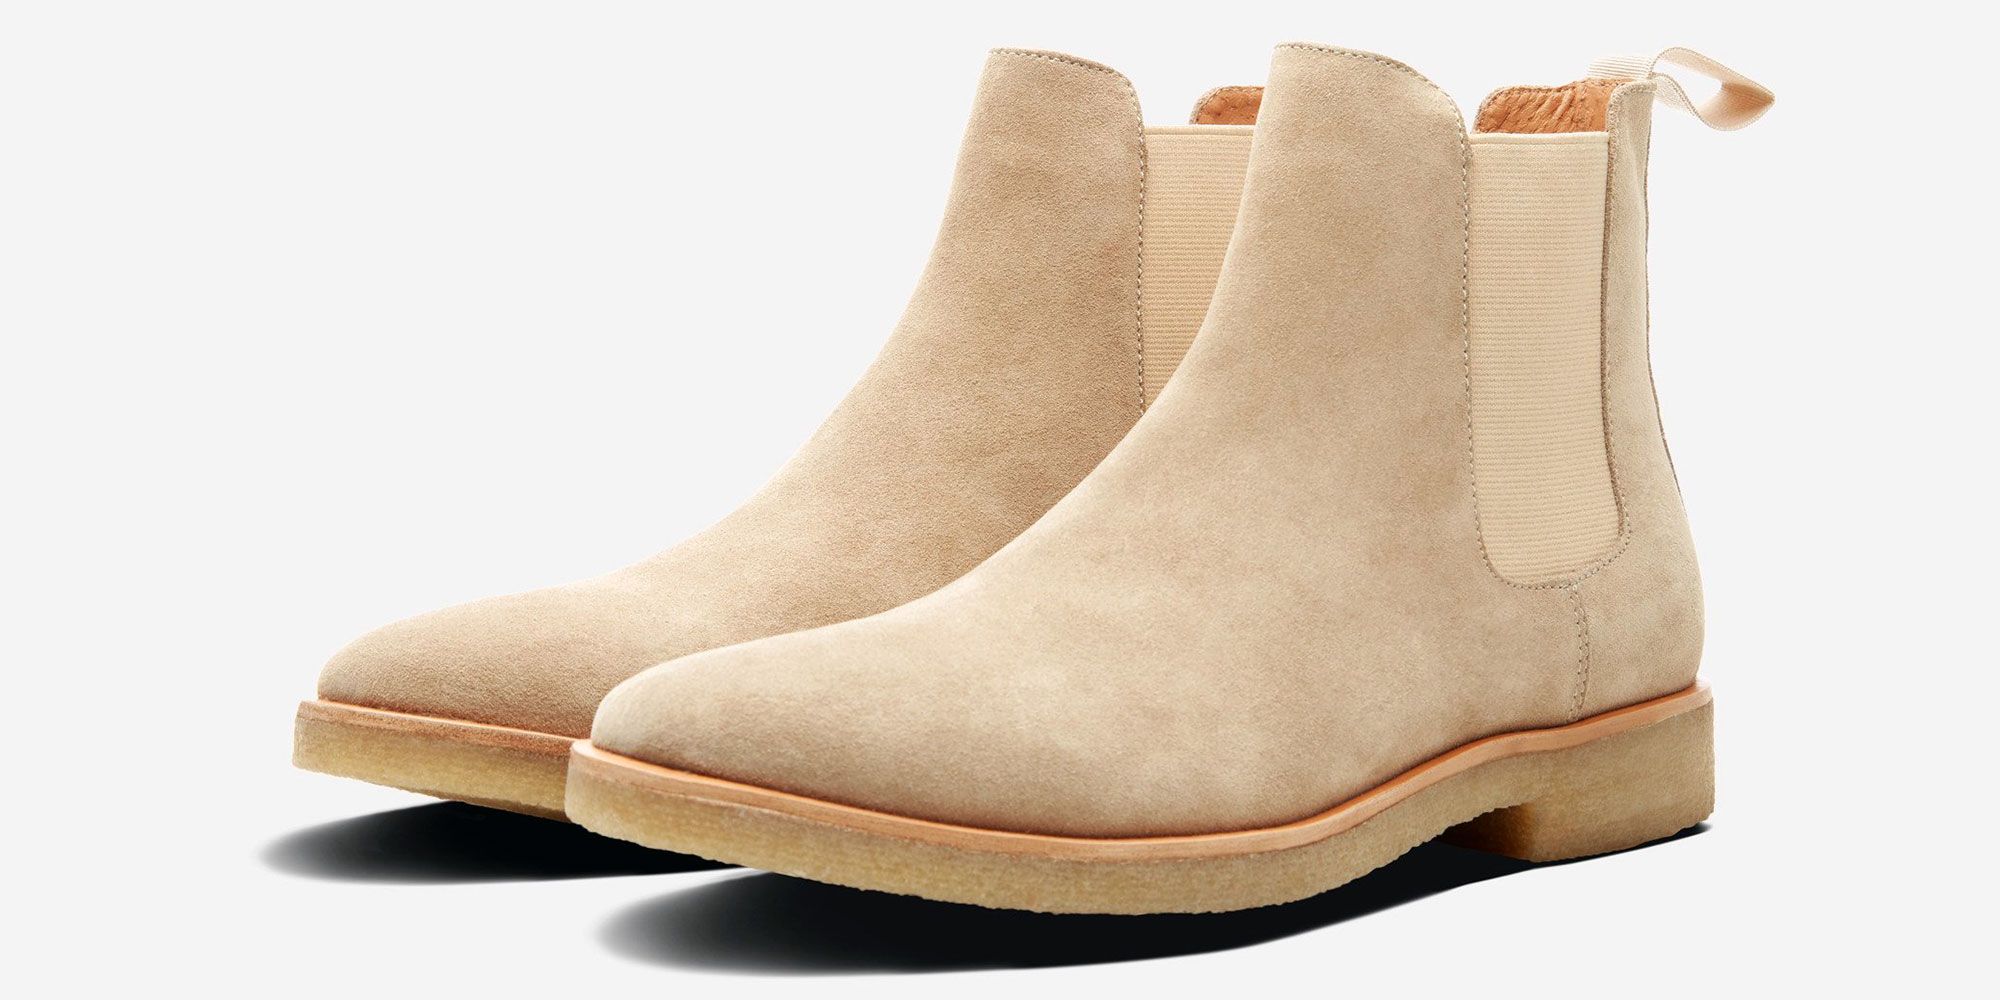 Baller Chelsea Boots for Guys on a 